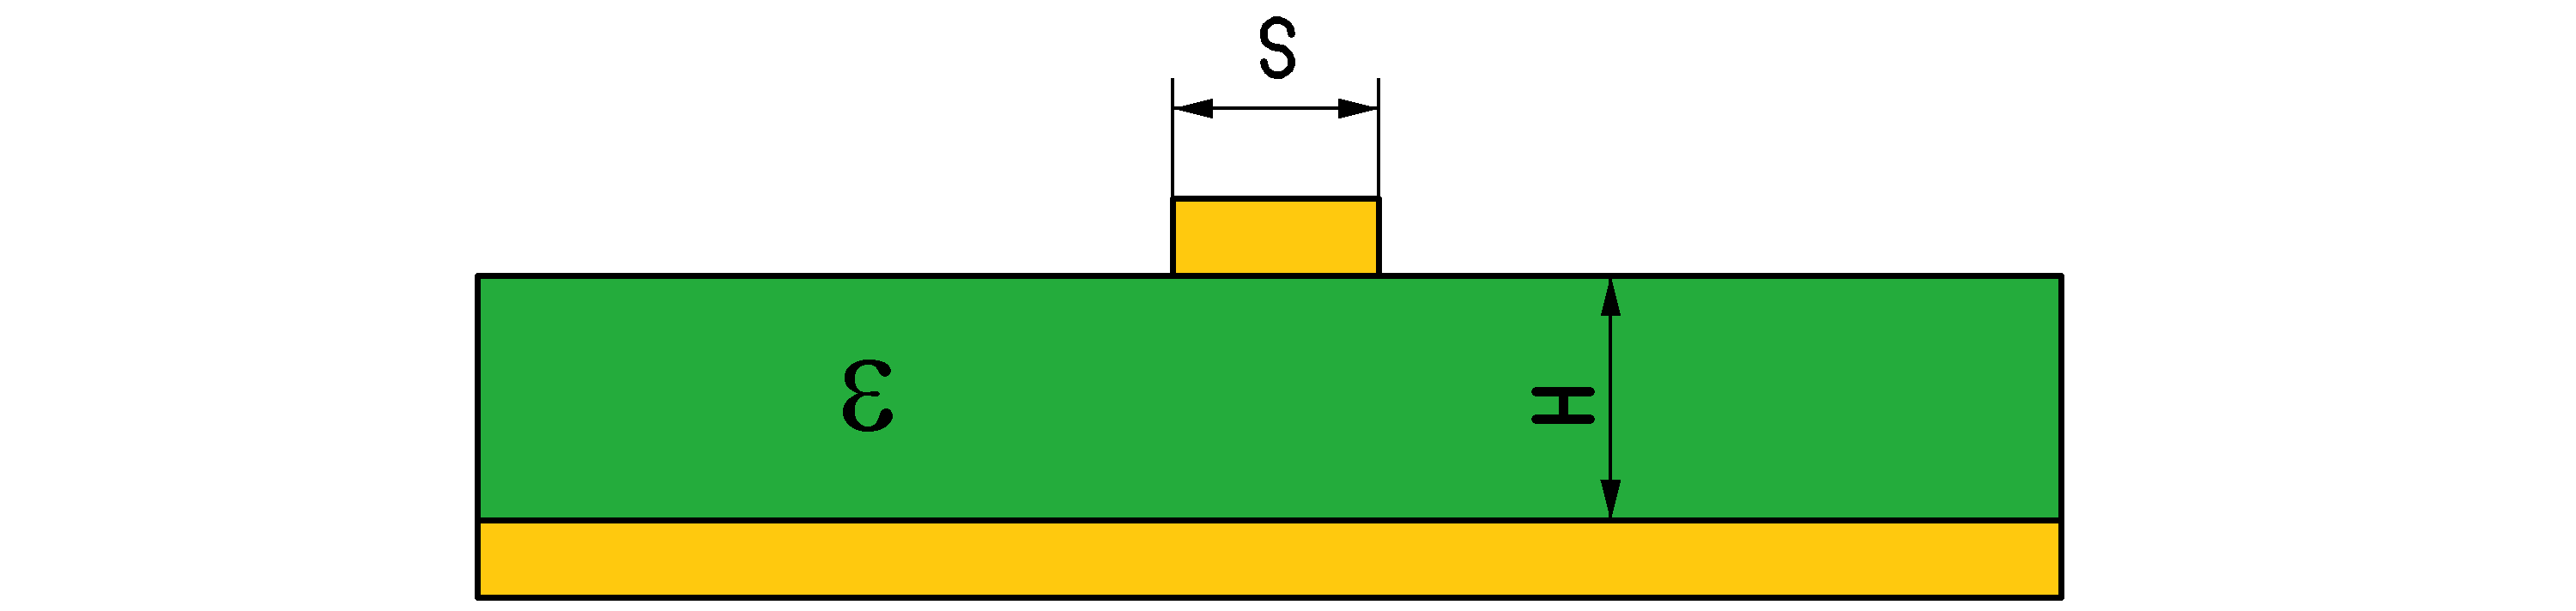 Microstrip with ground